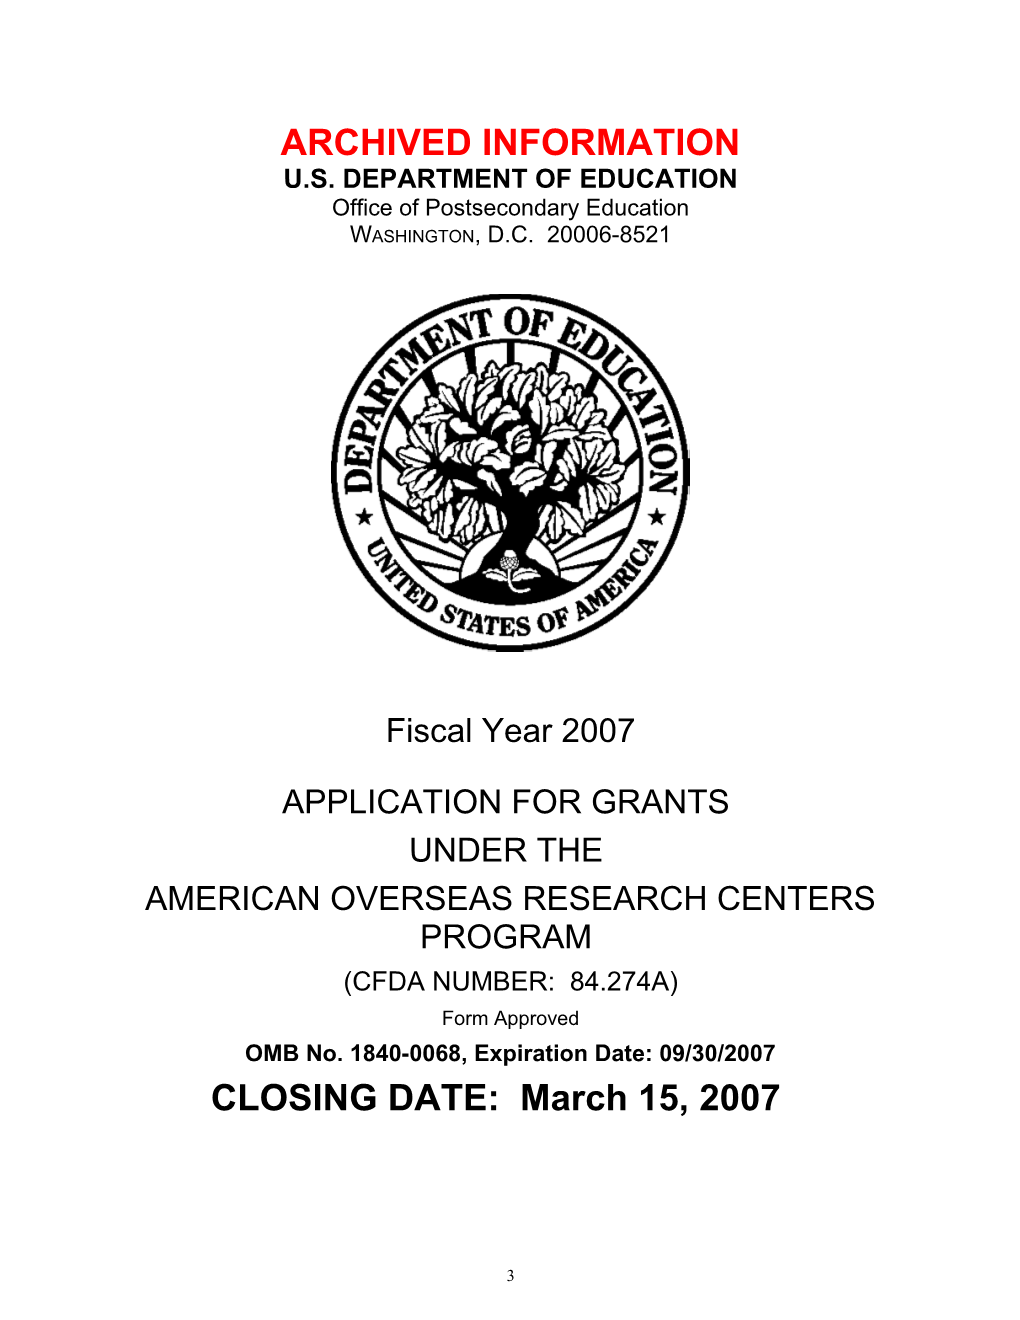 Archived: FY 2007 Application for the American Overseas Research Centers Program (MS Word)